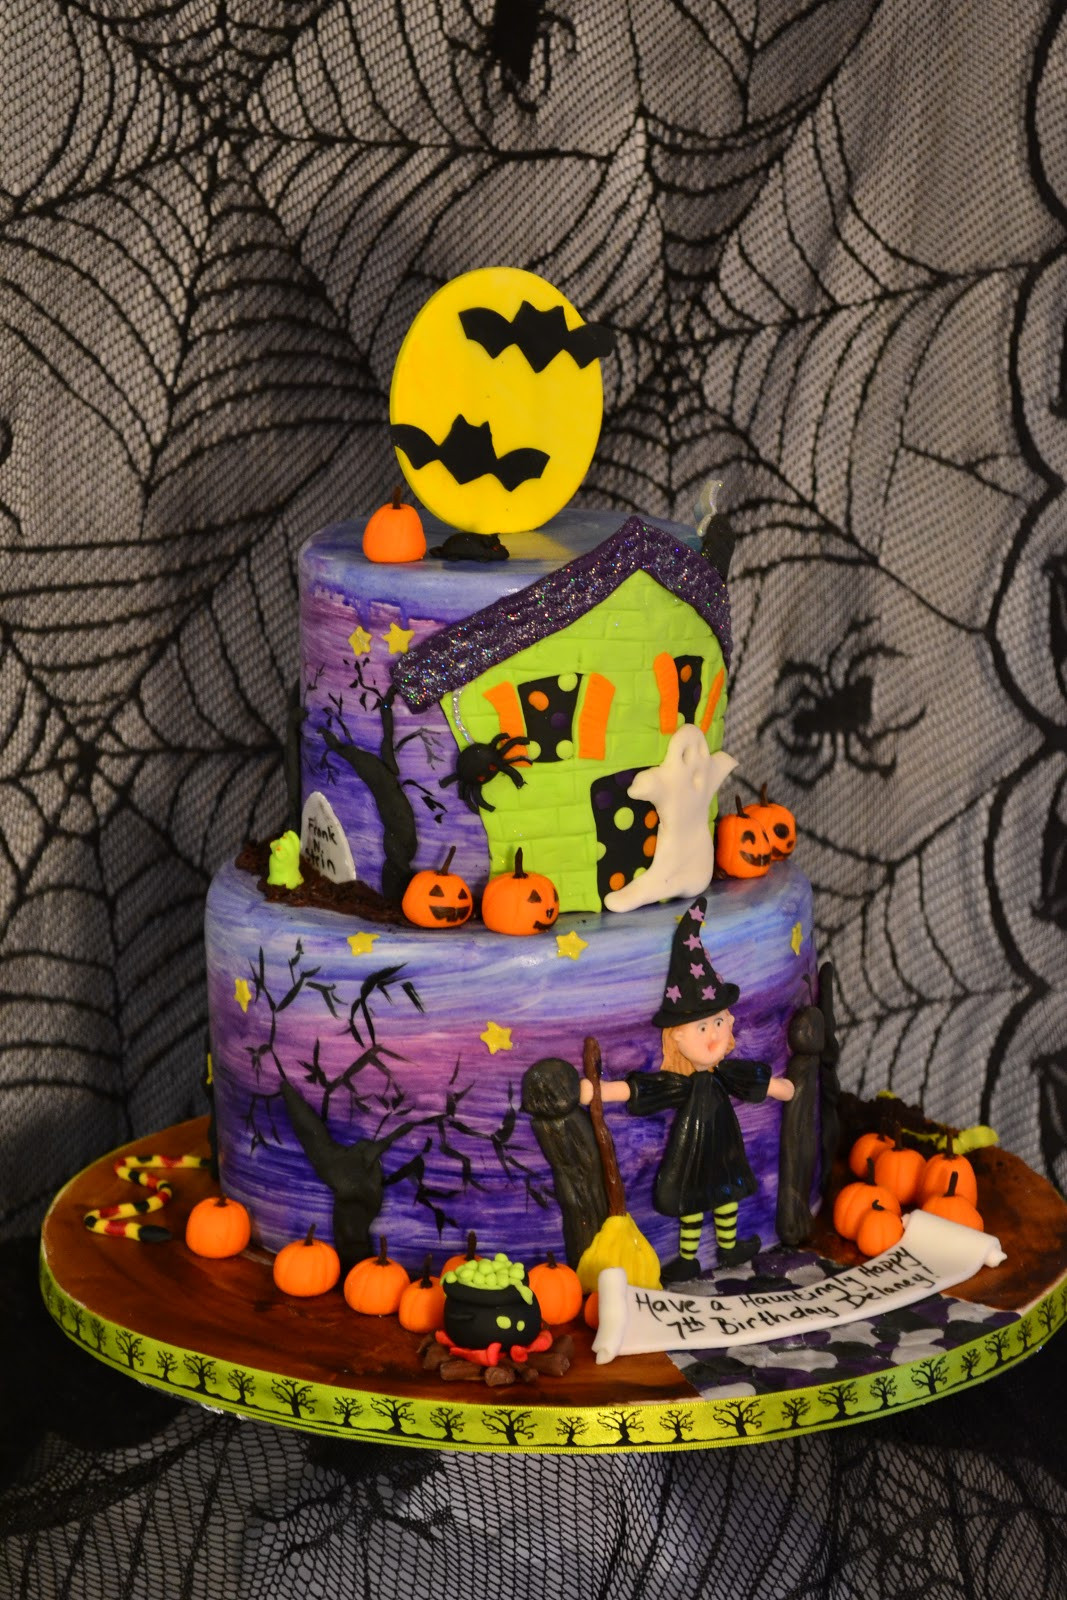 Halloween Birthday Cakes Pictures
 Oh just put a cupcake in it Halloween birthday cake